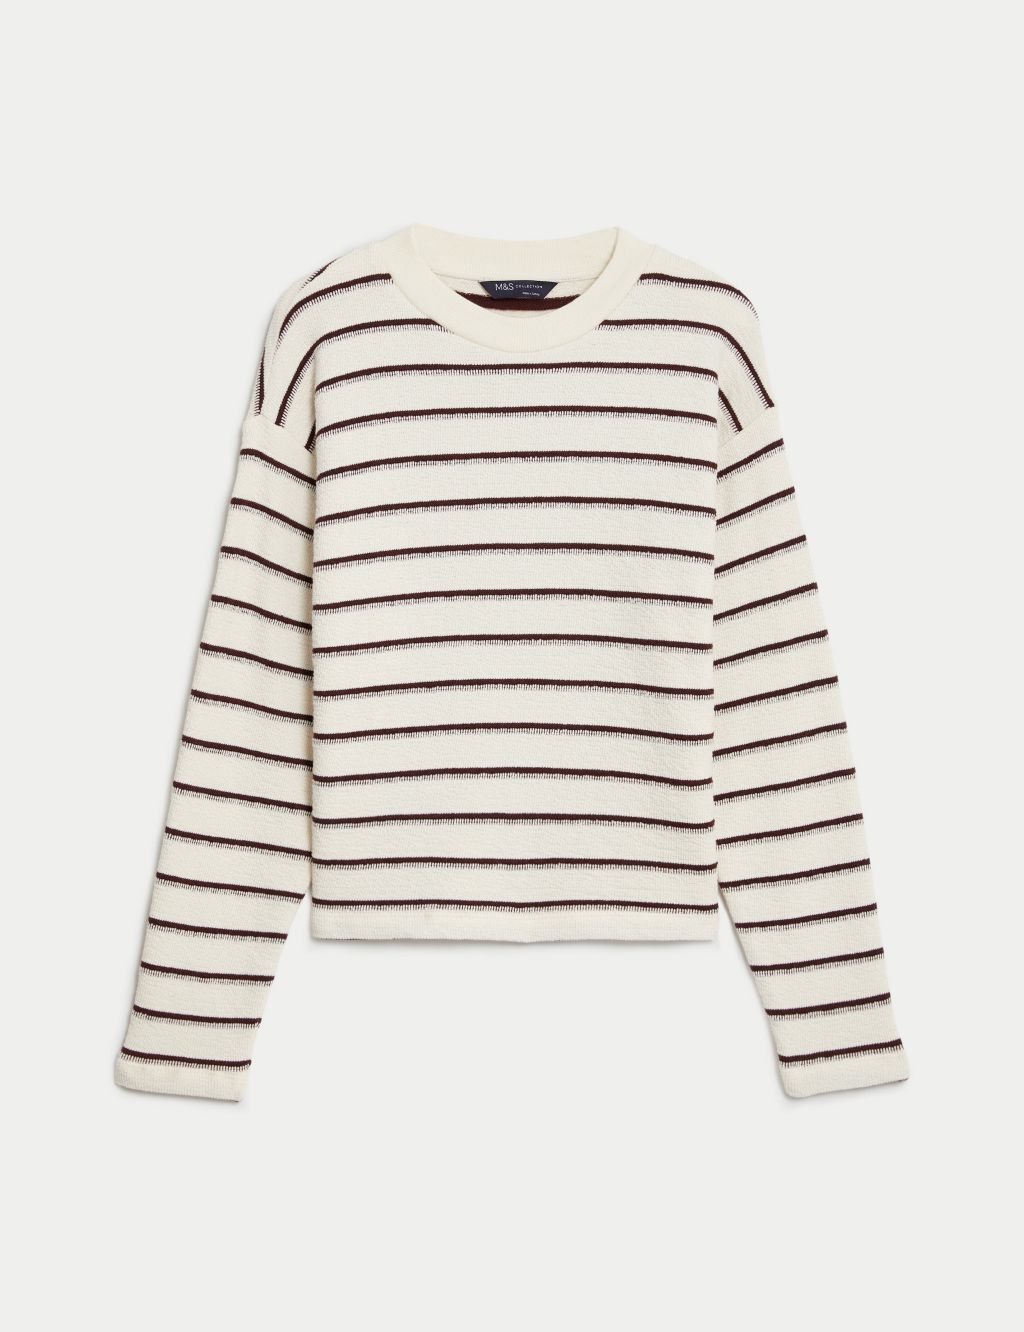 Cotton Rich Textured Striped Top image 2